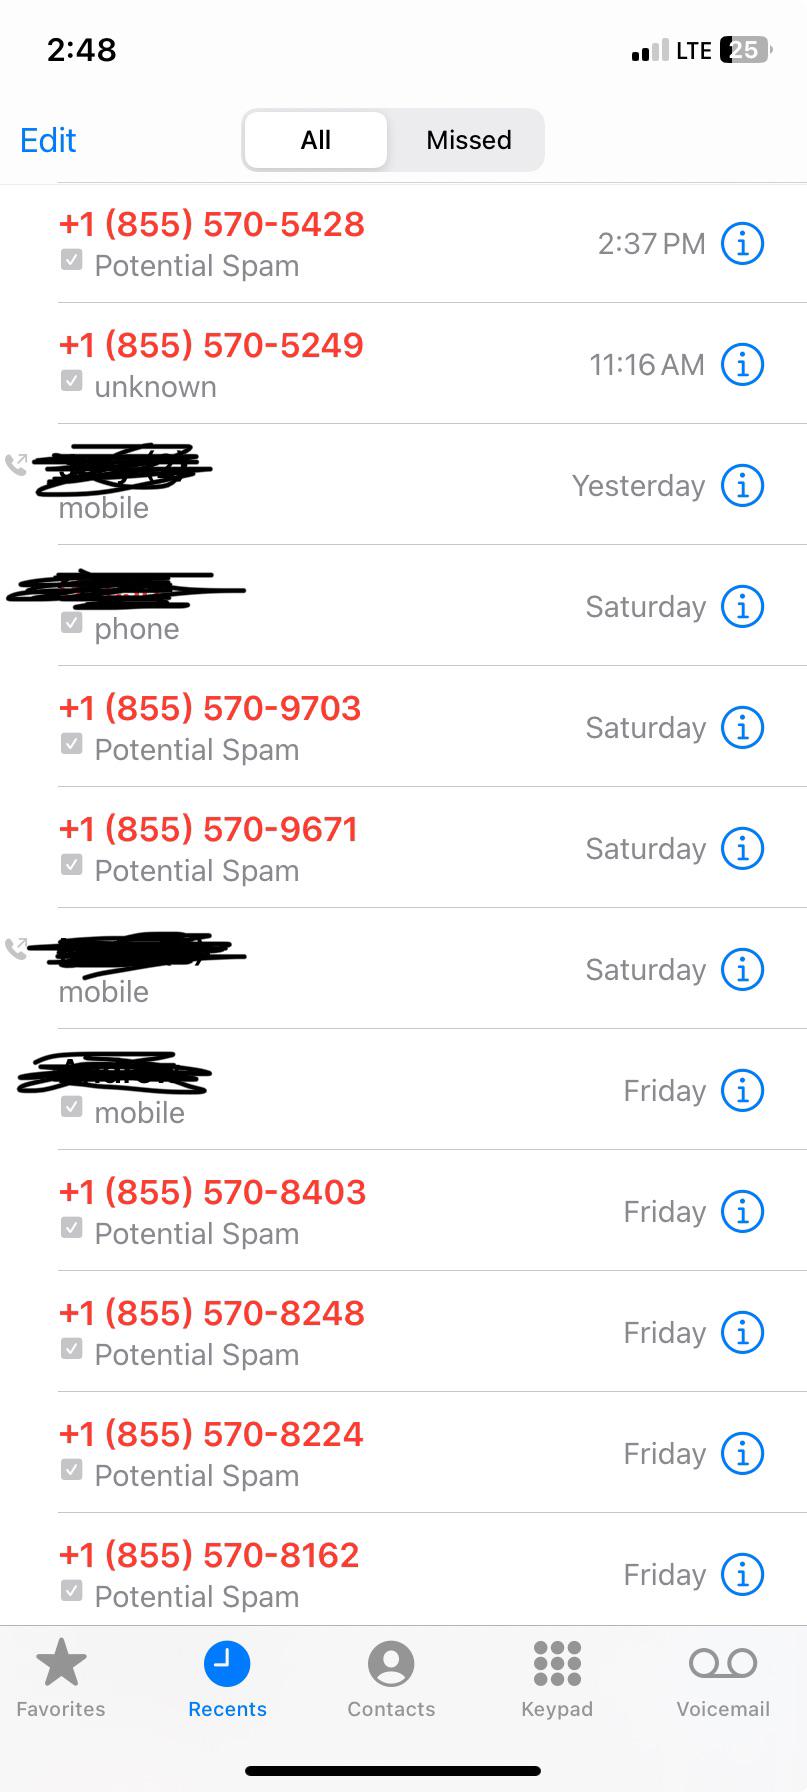 Users receive a lot of Spam Calls 